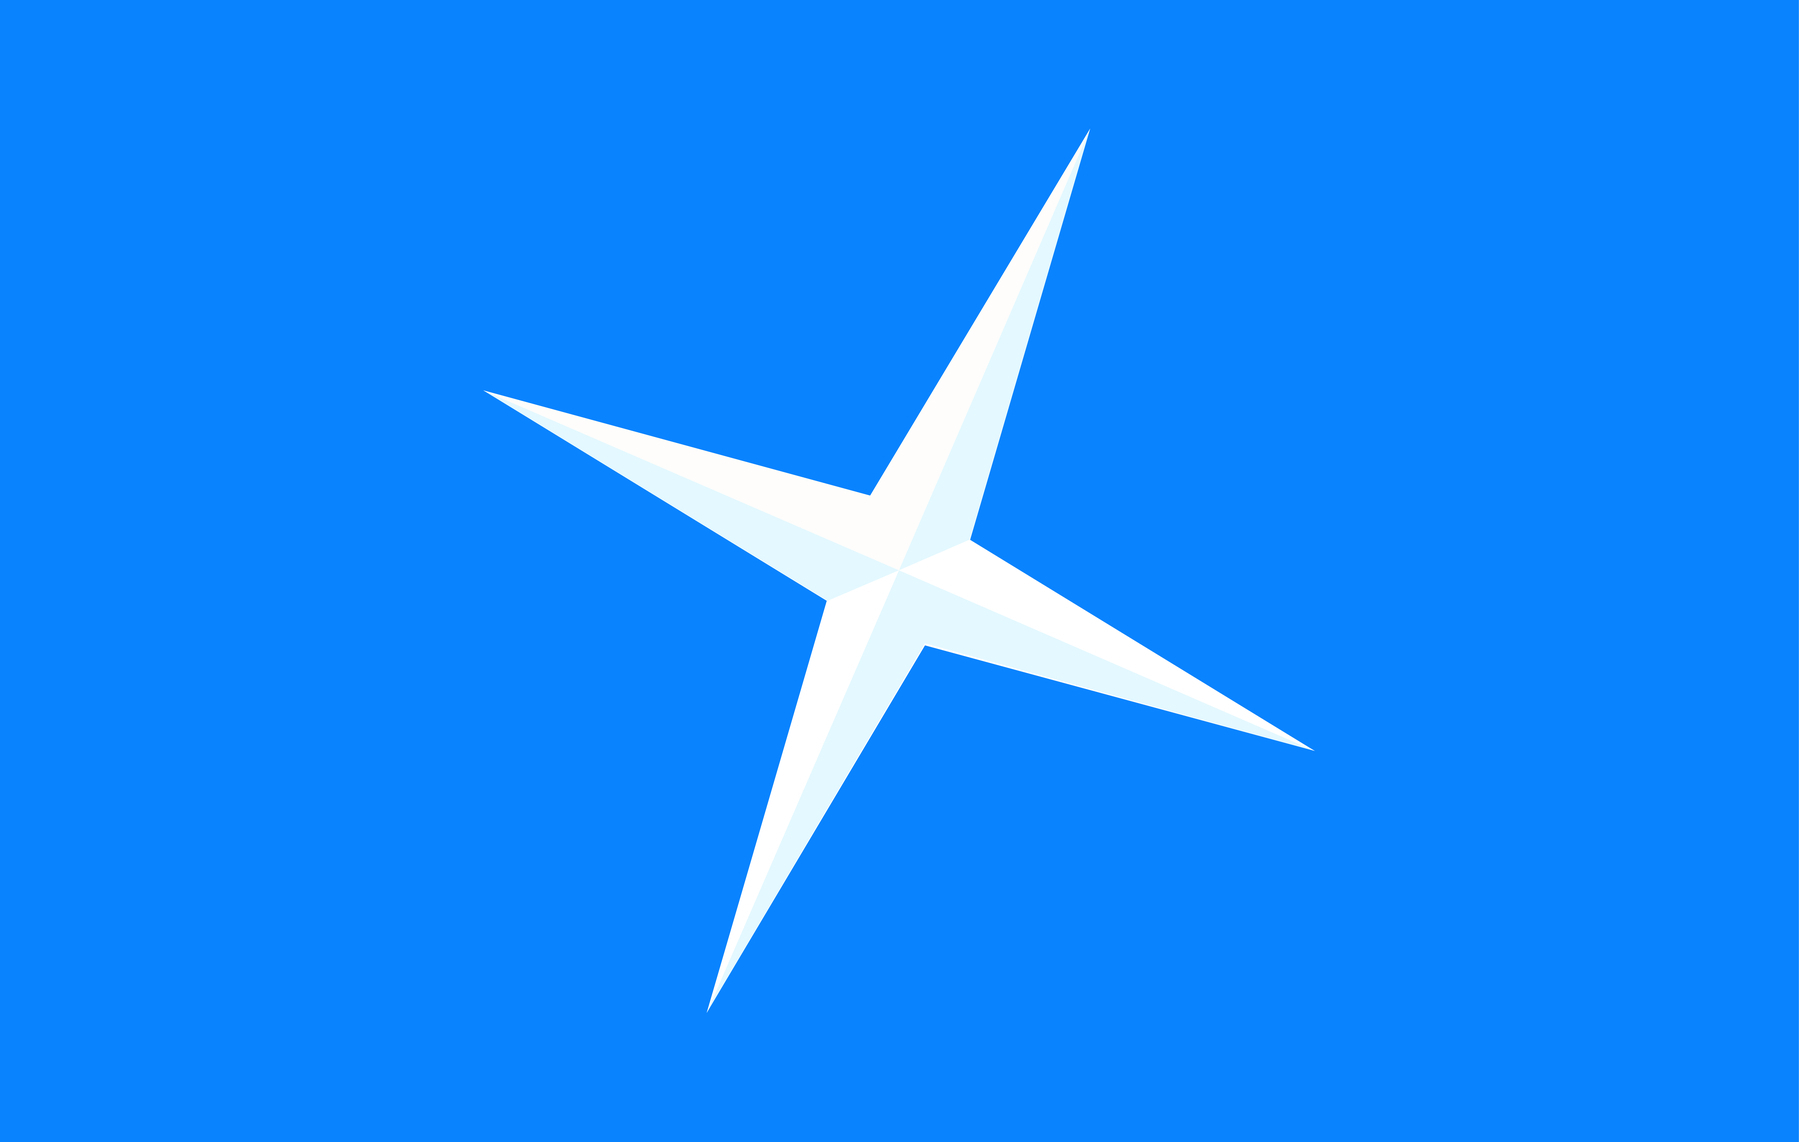 Auto-generated description: A white star is centered on a solid blue background.